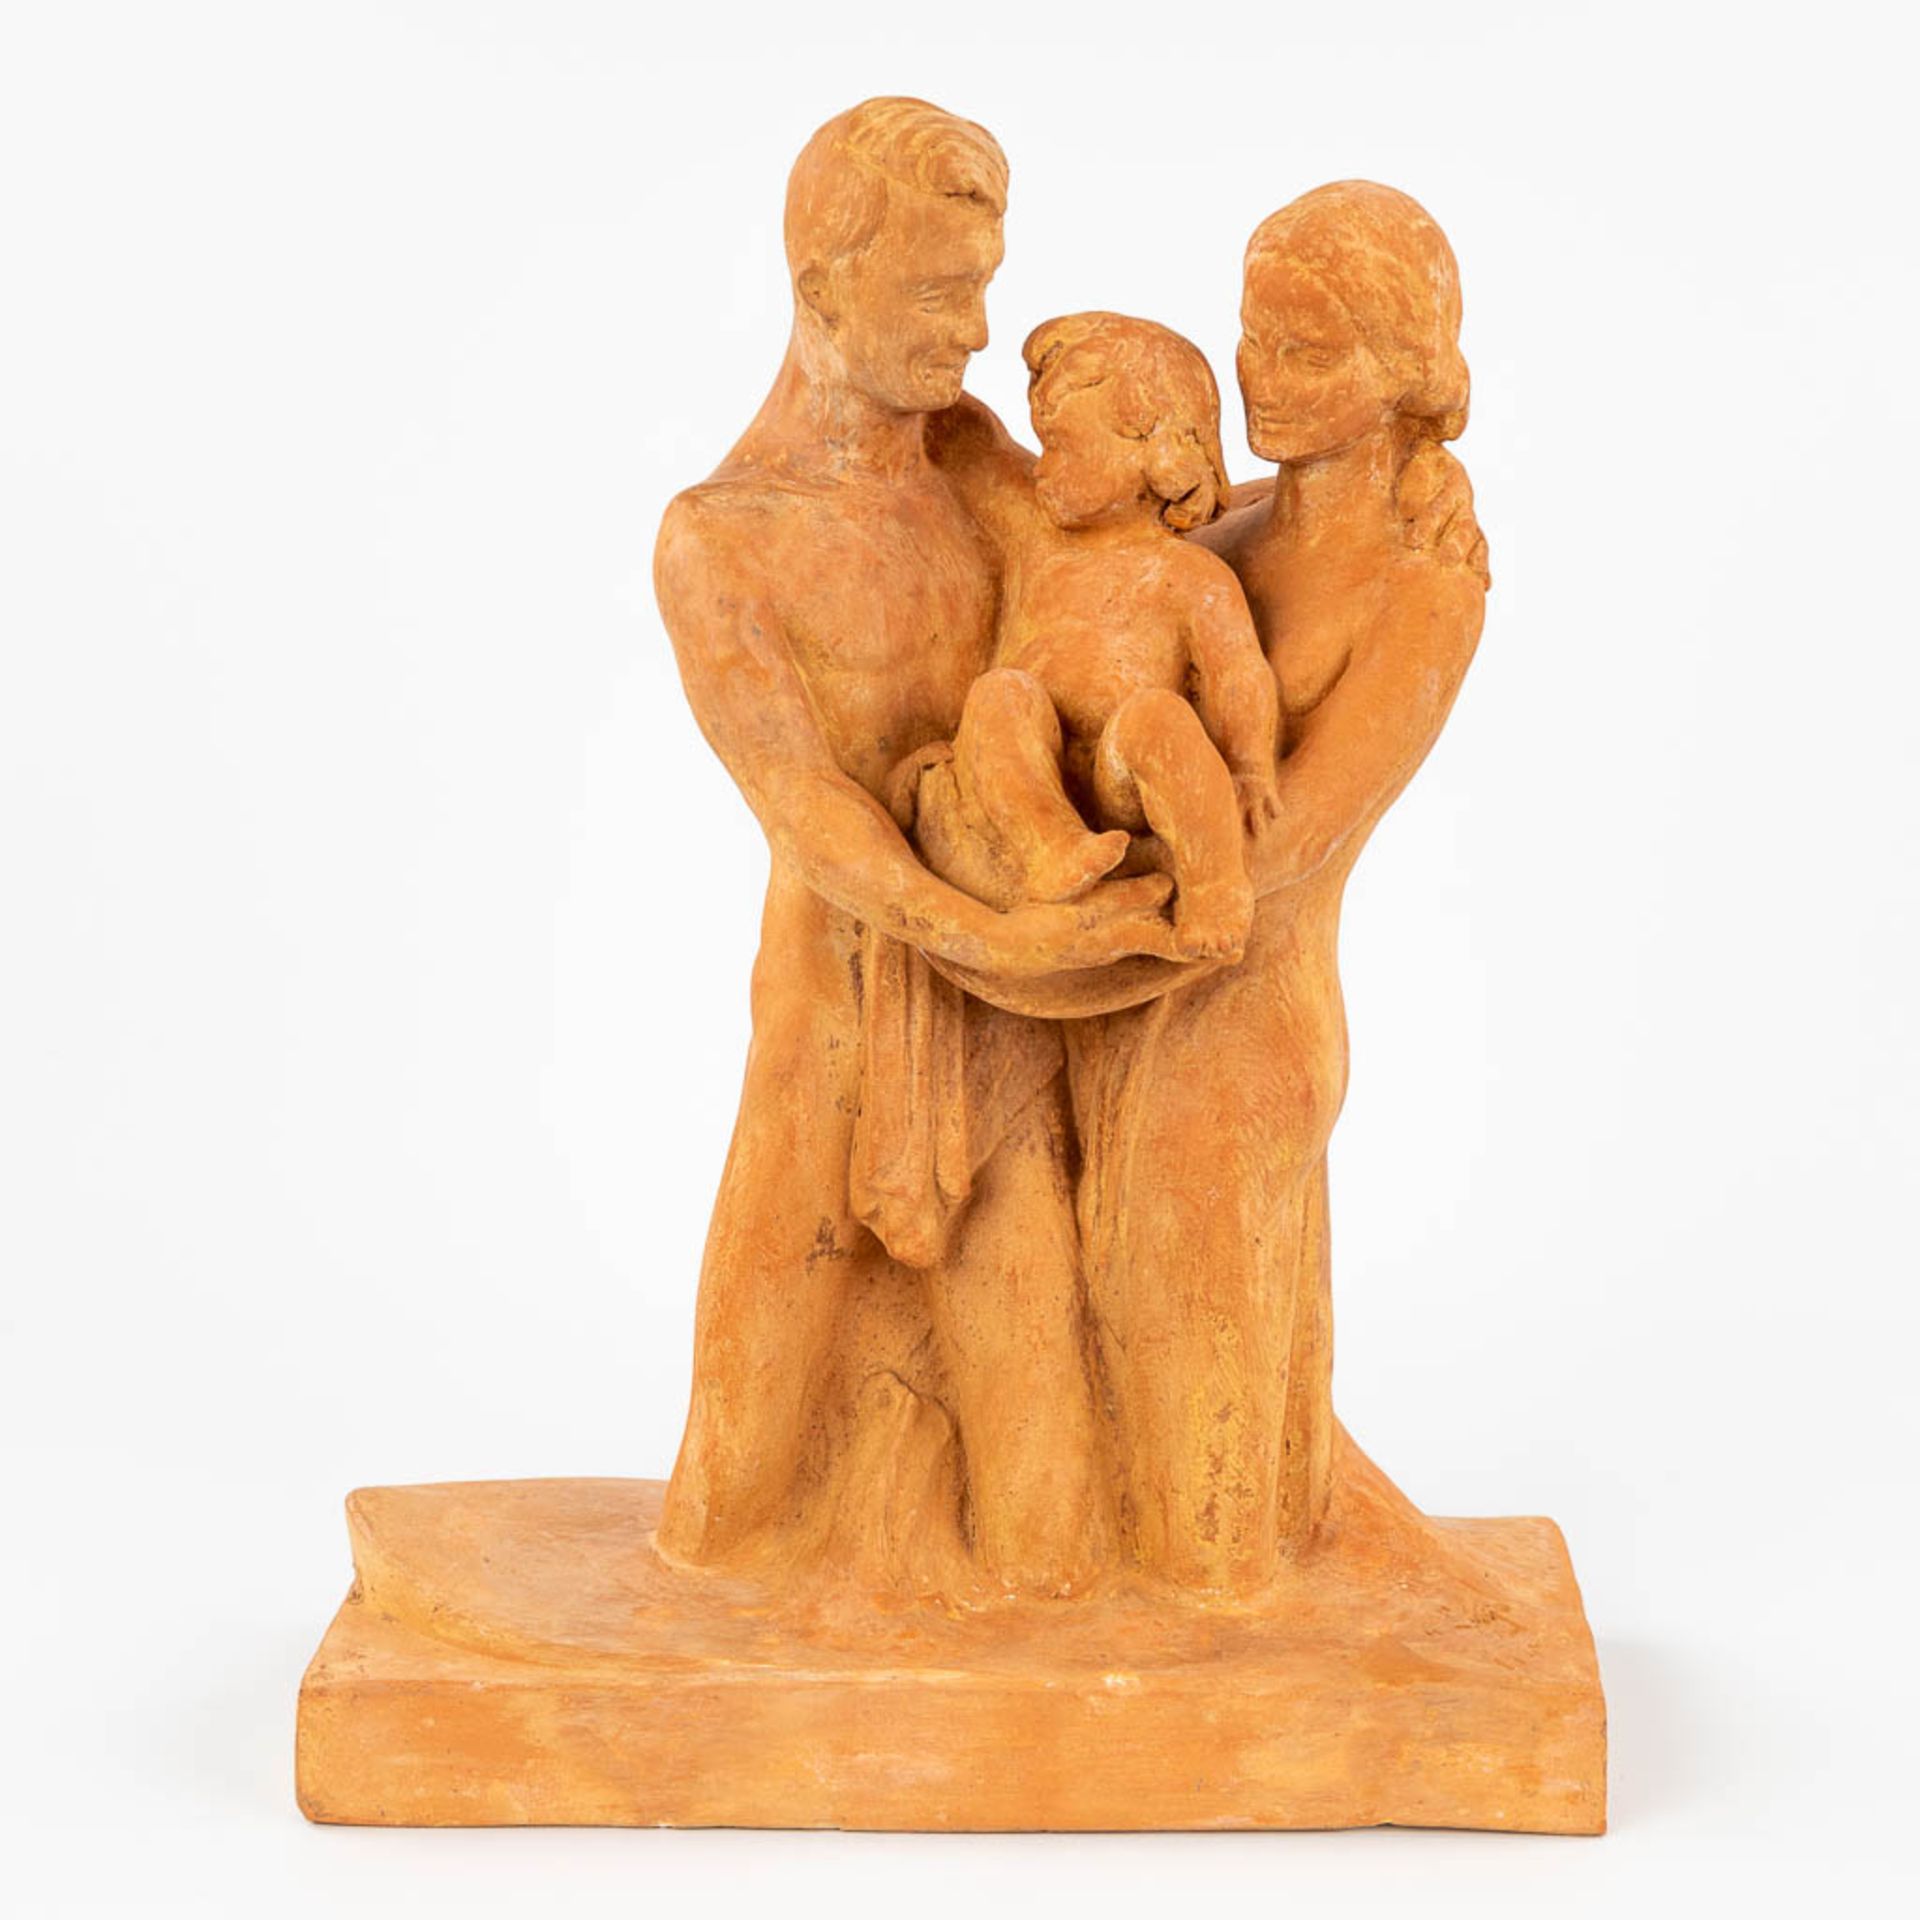 Achille LEYS (1873-1953) 'Family' a statue made of terracotta.Ê1946. (16 x 34 x 44cm)